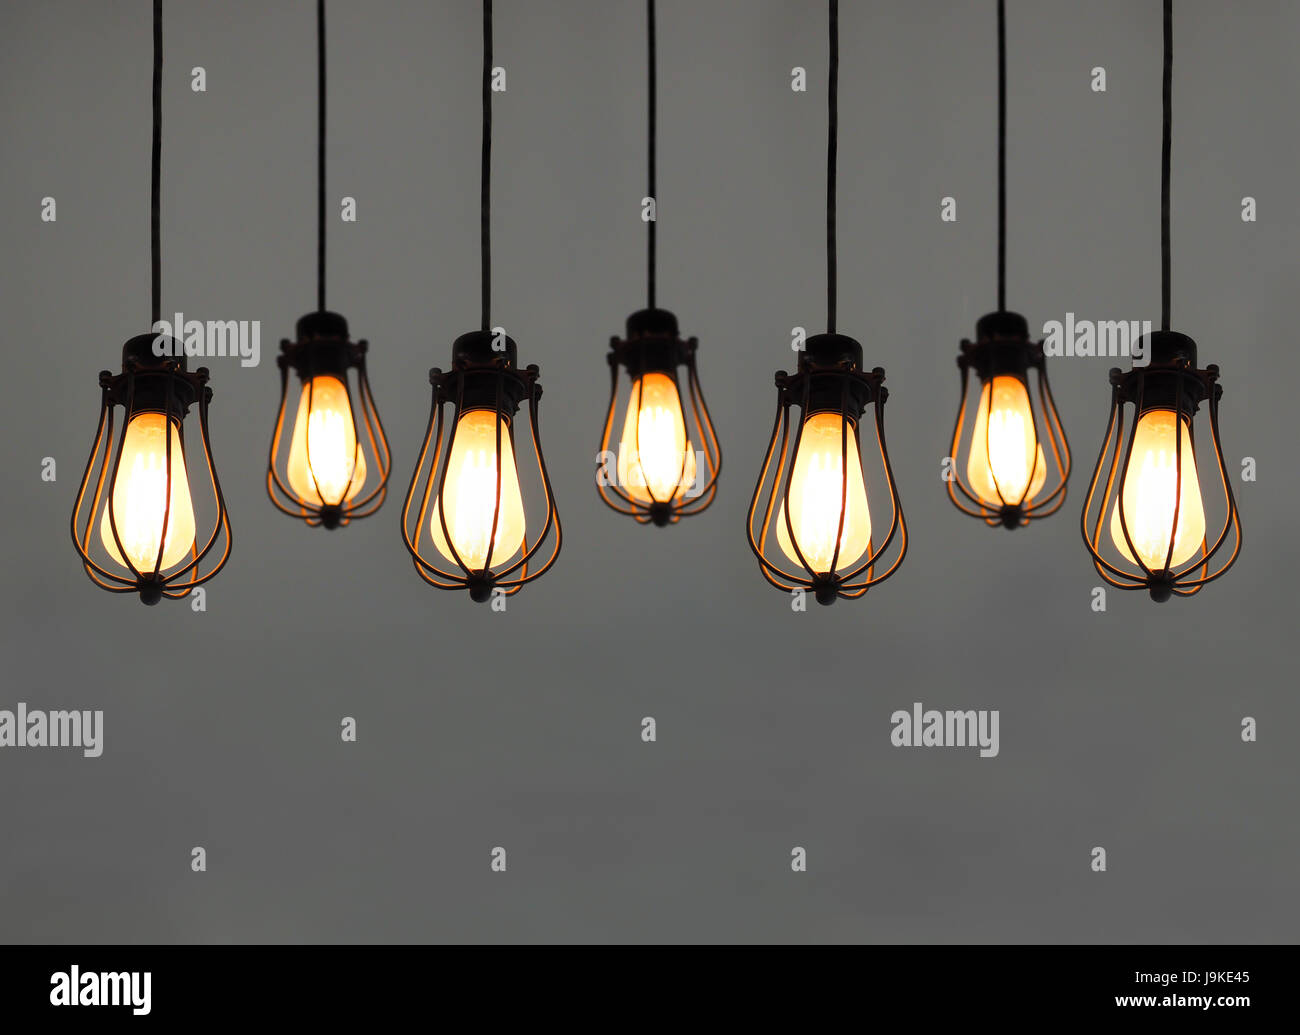 Beautiful hanging light bulbs on plain background for card, banner,  wallpaper Stock Photo - Alamy